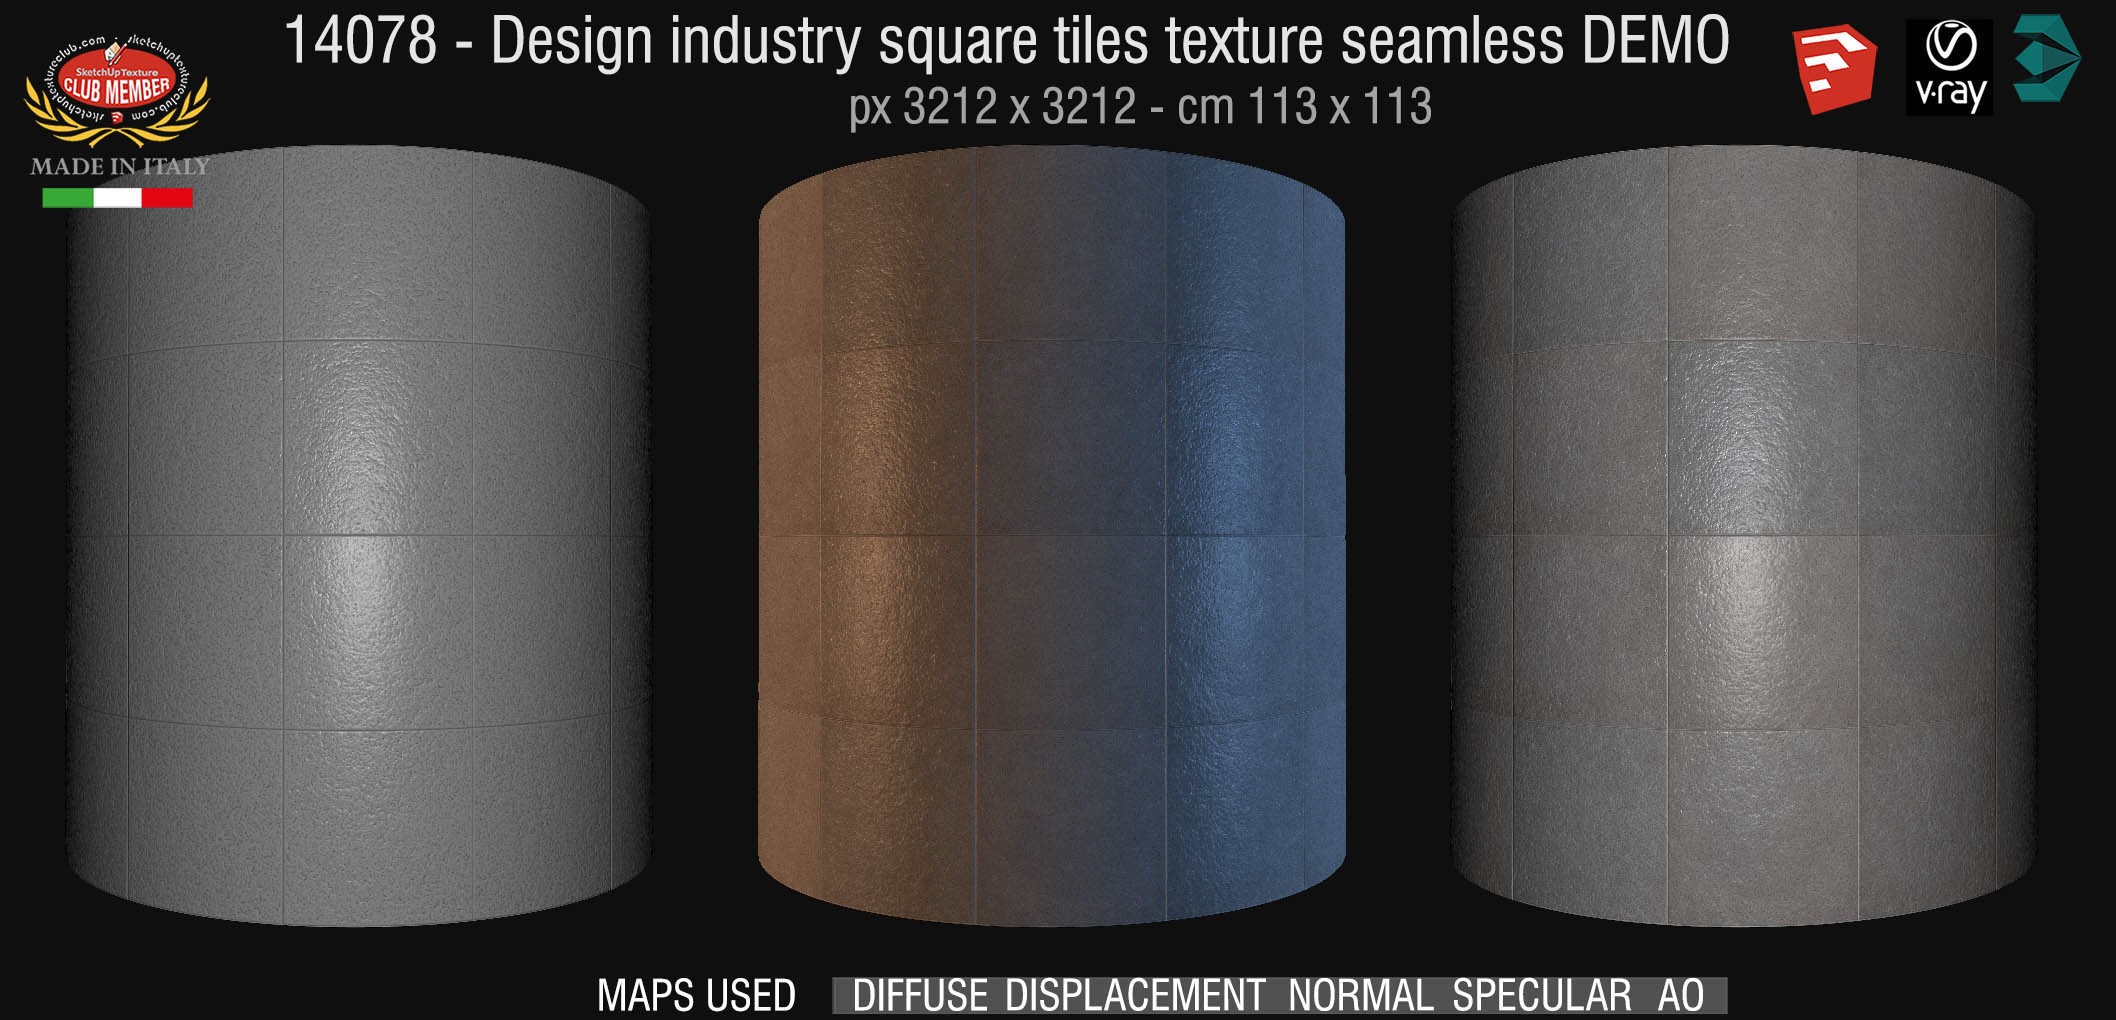 14078 Design industry square tile texture seamless + maps DEMO